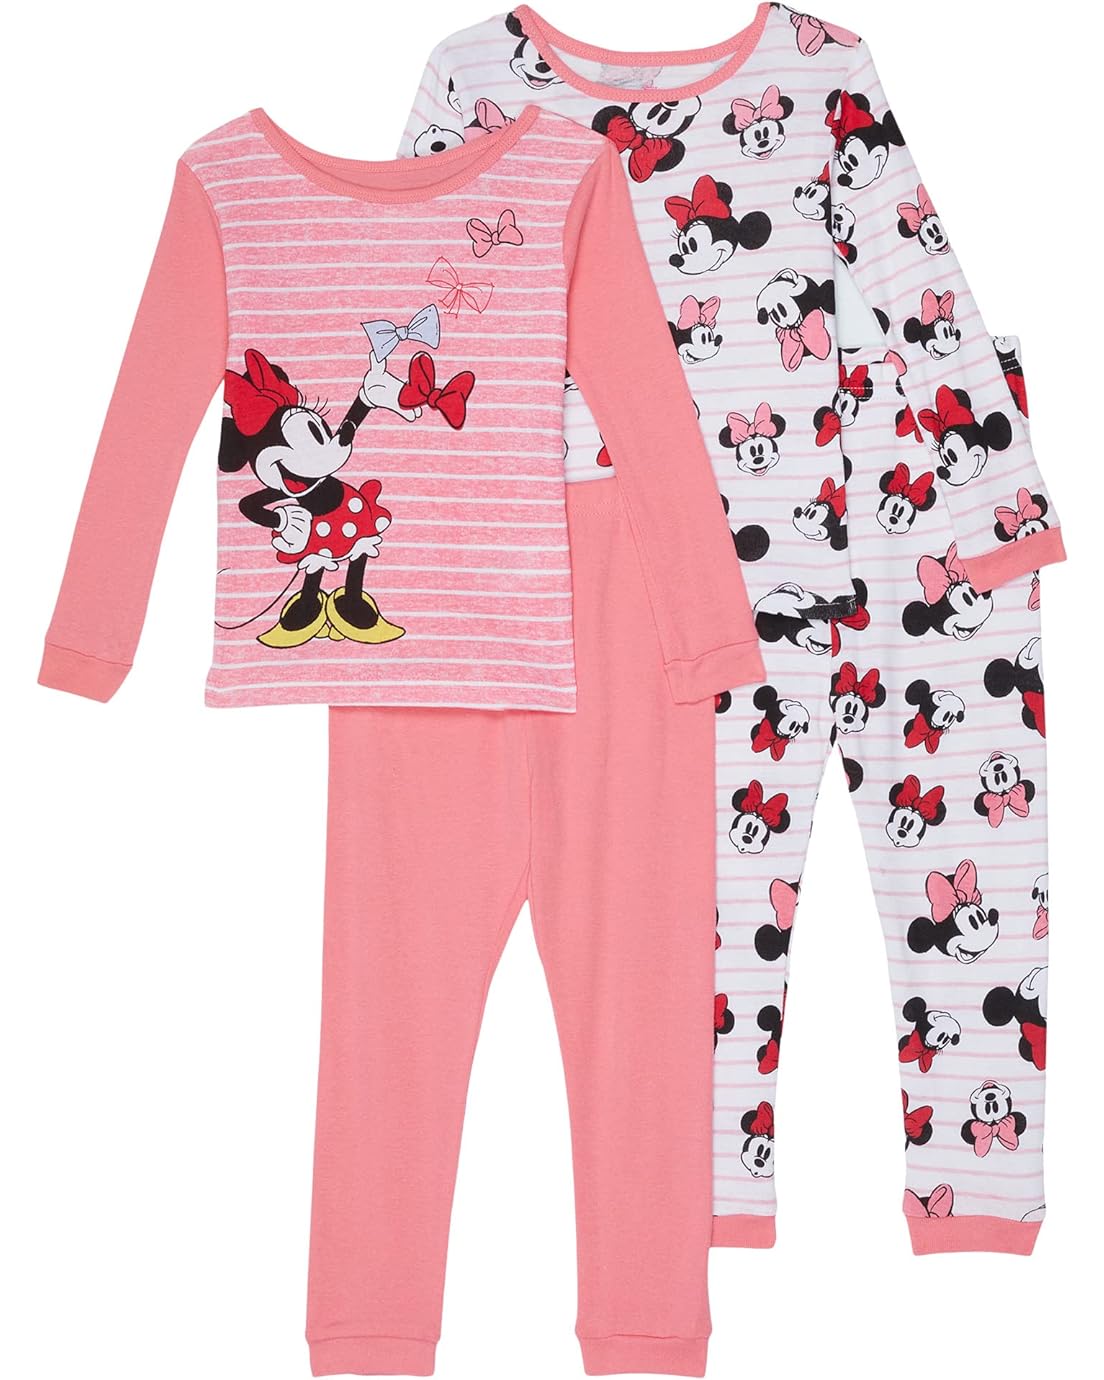 Favorite Characters Minnie Bows (Toddler)